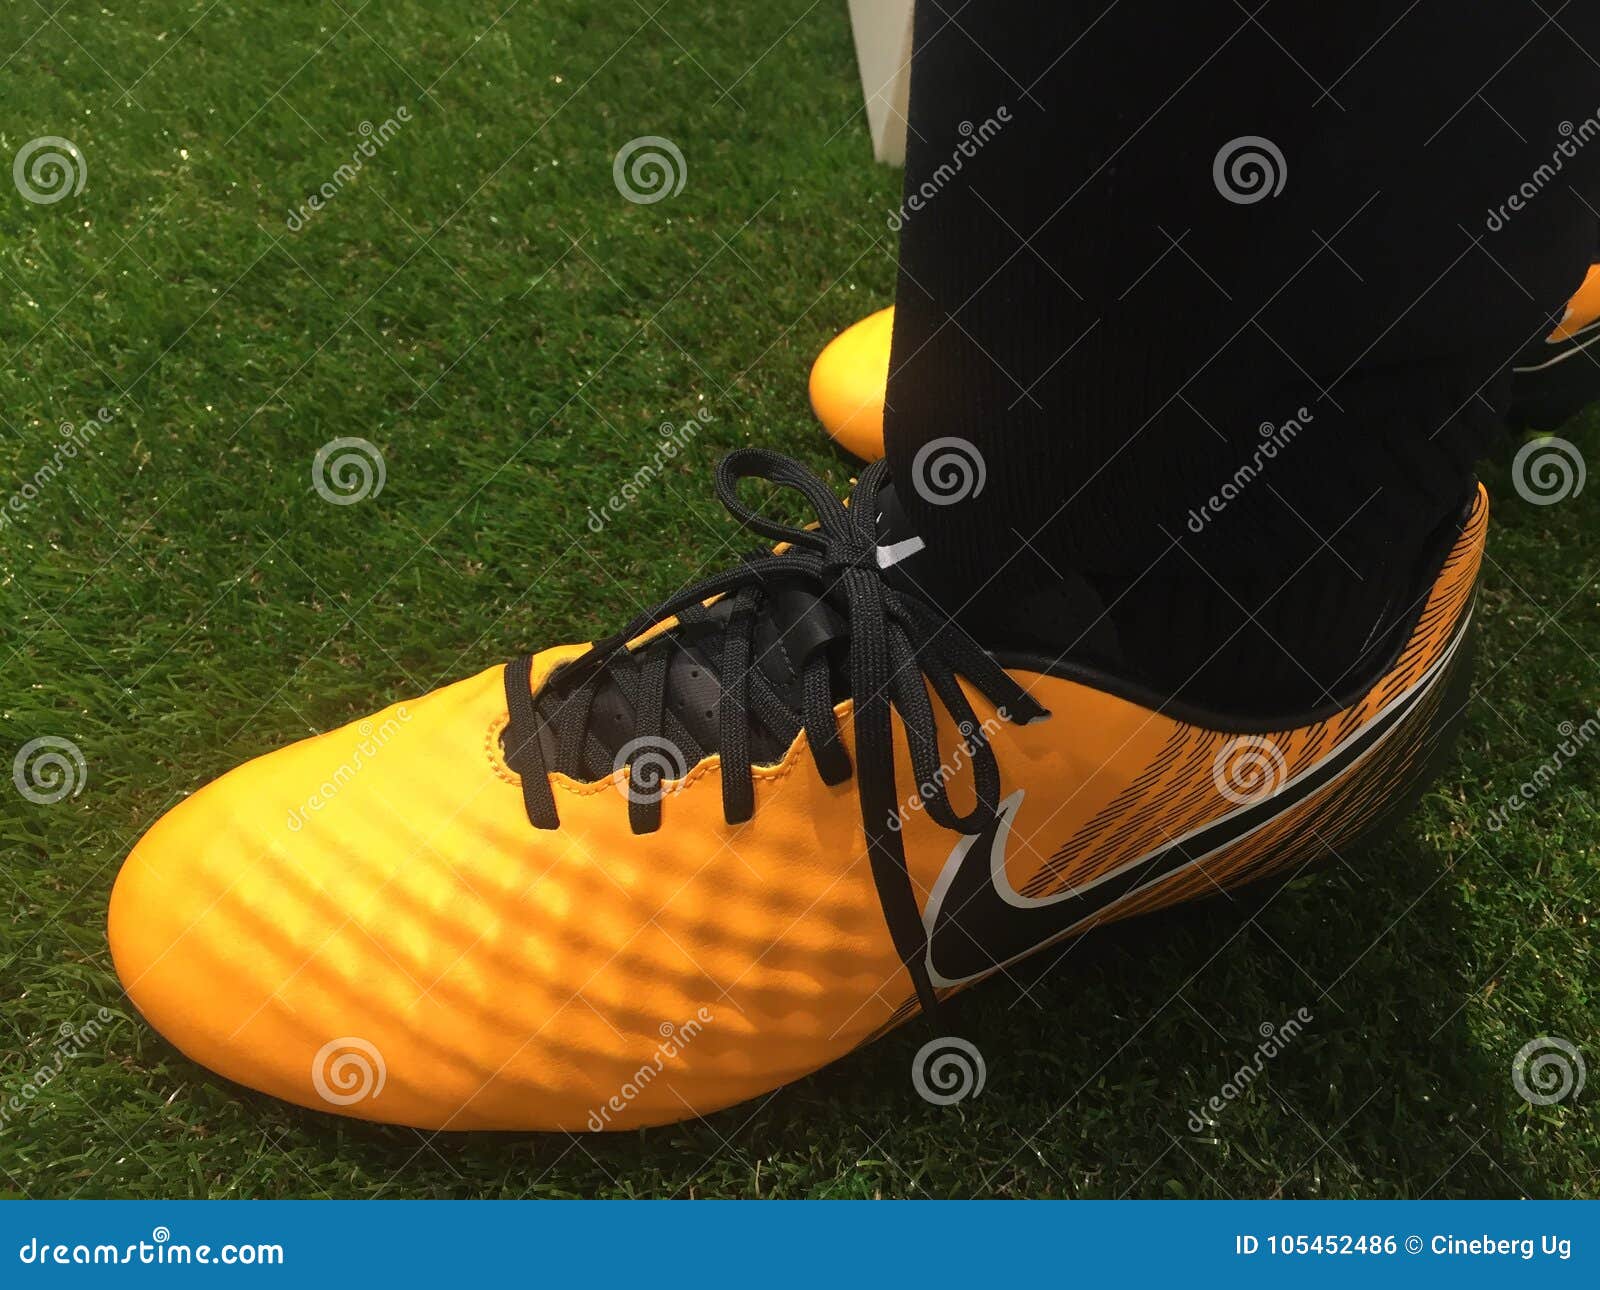 Nike Football Shoes for Editorial Photo - of clothes, 105452486